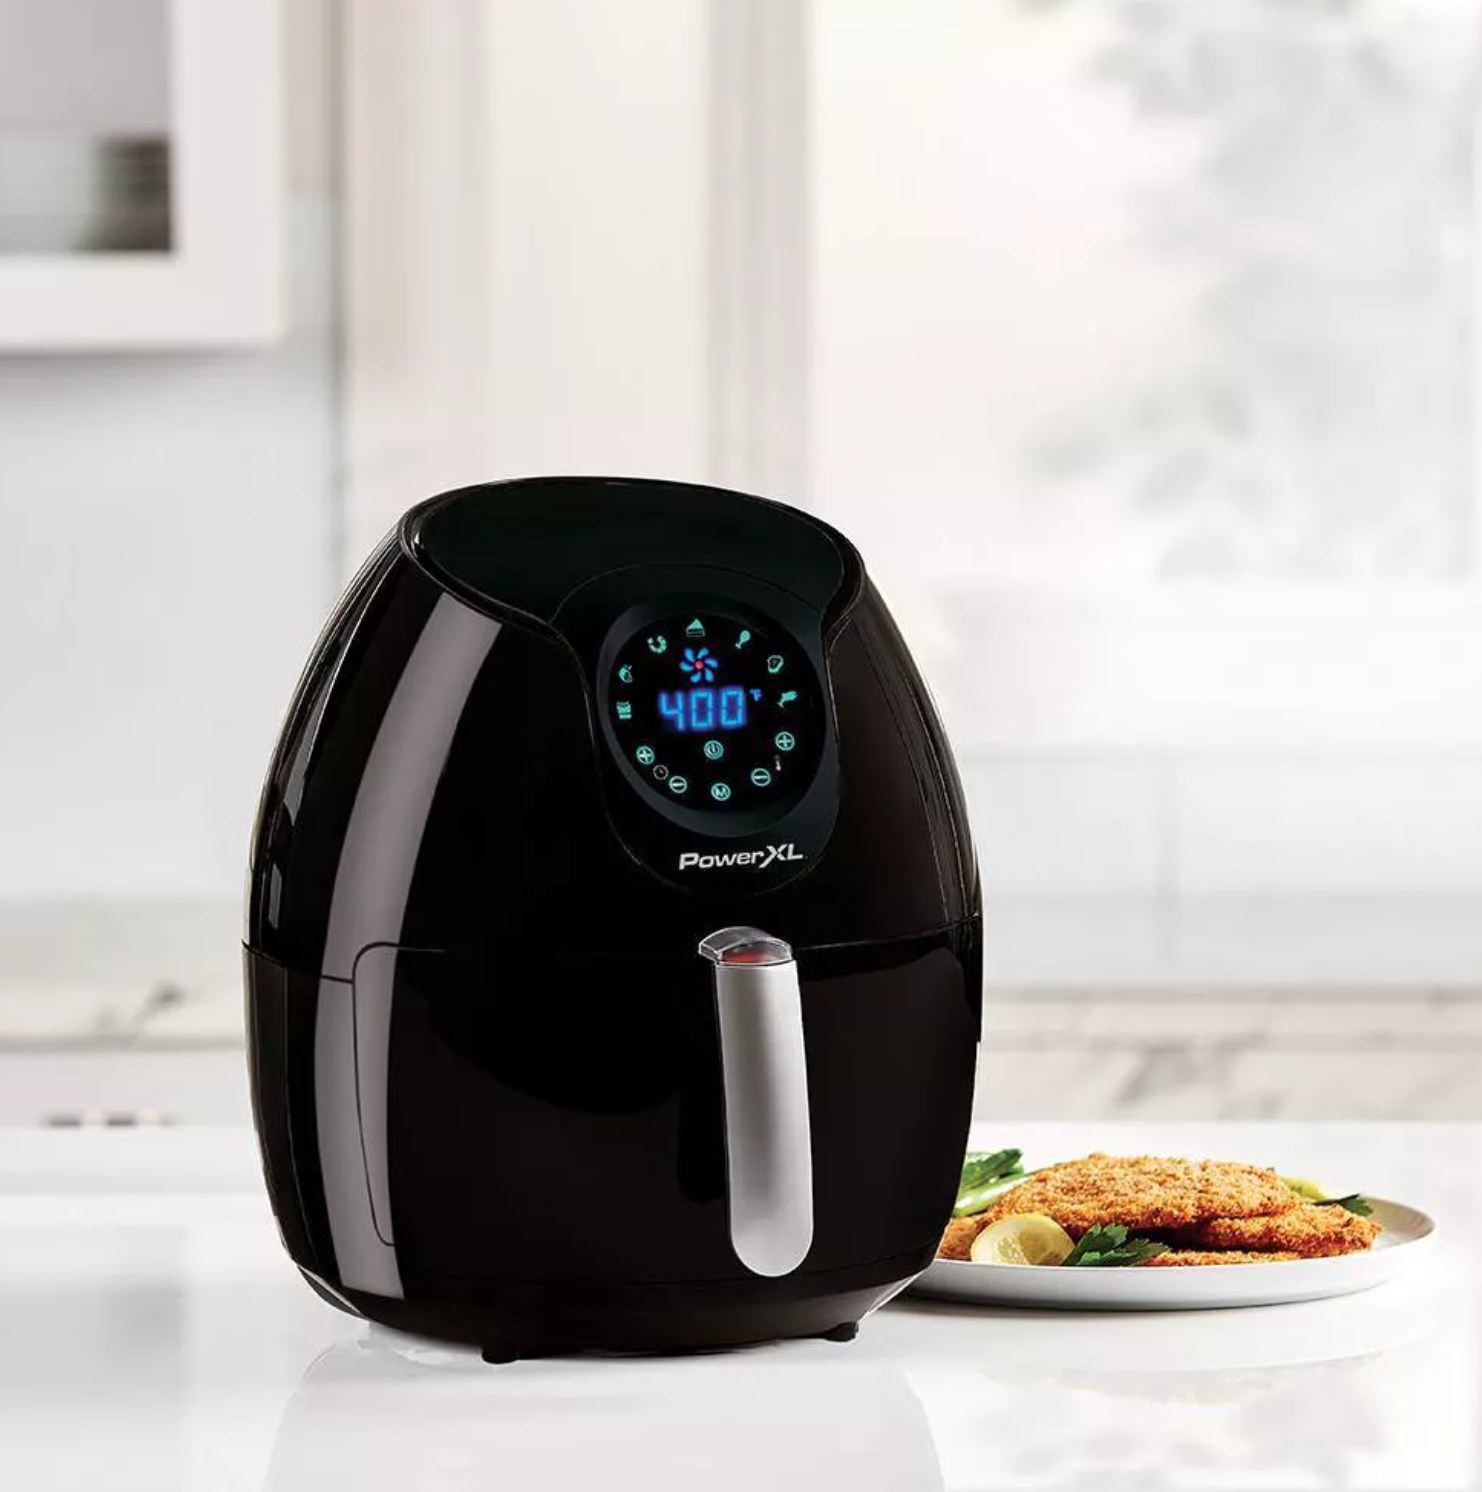 the black air fryer next to a plate of food